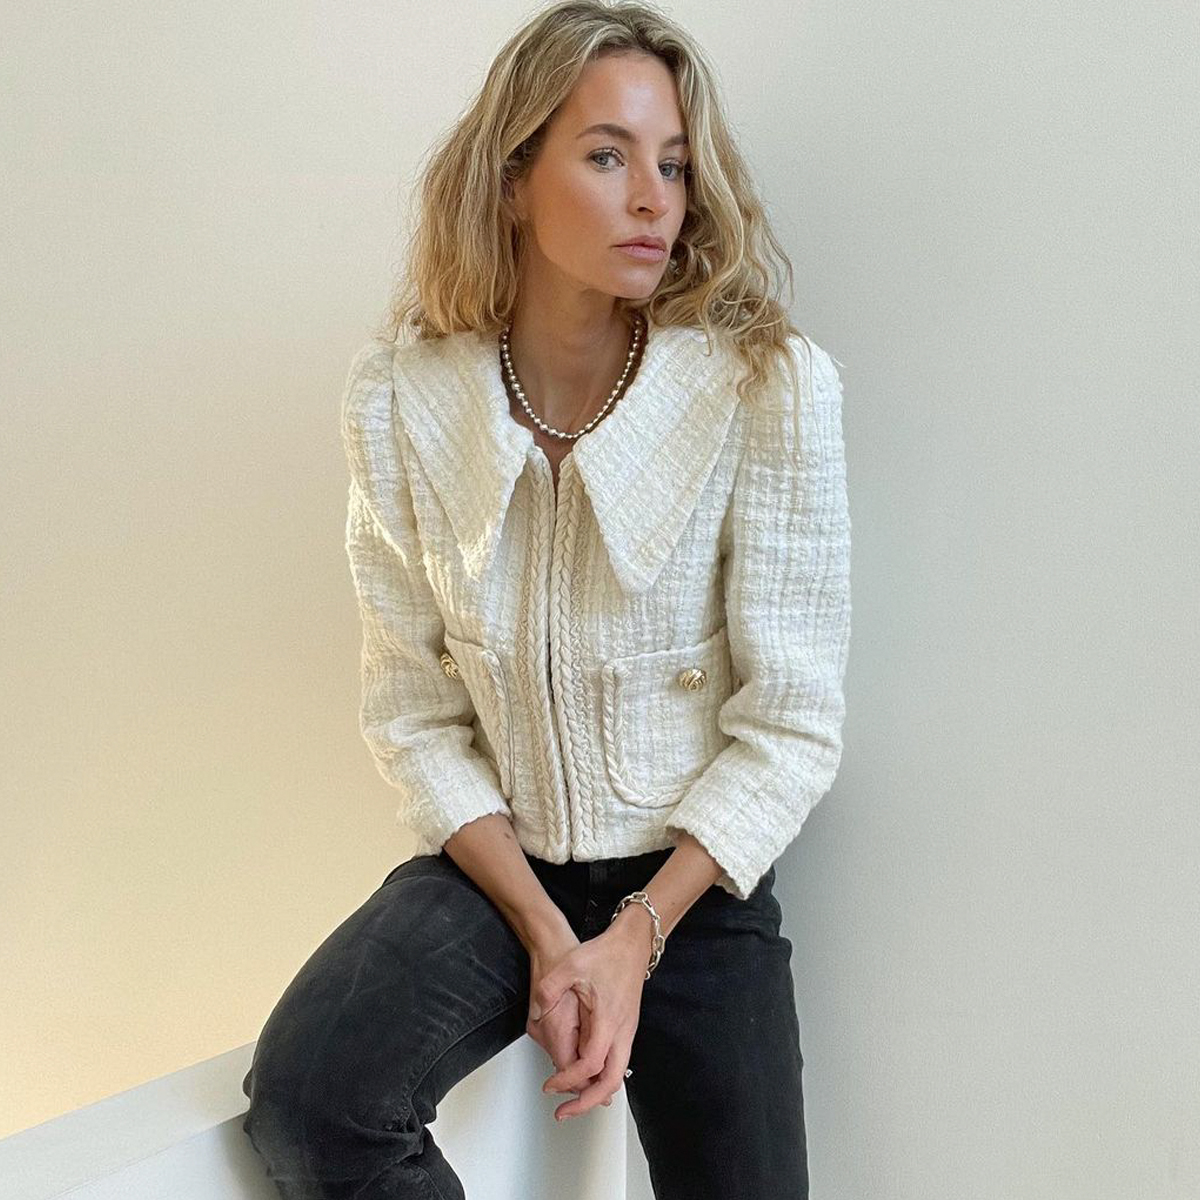 How to Style a Bouclé Jacket: 7 Looks to Try This Spring